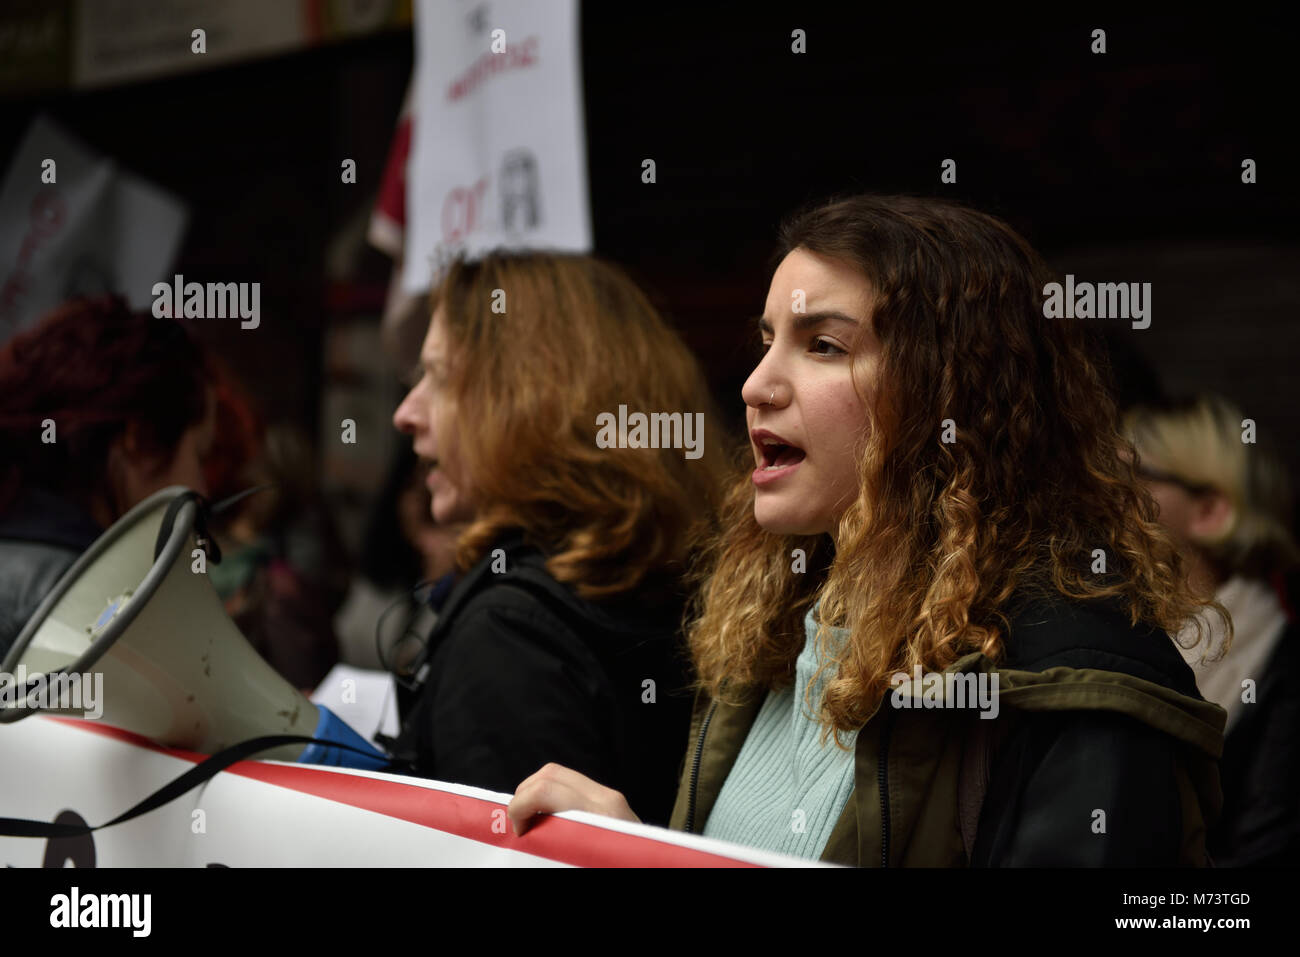 Athens, Greece, 8th March, 2018. A woman chants slogans standing in front of the Ministry of Labor to honor the International Women's Day  in Athens, Greece. Credit: Nicolas Koutsokostas/Alamy Live News. Stock Photo